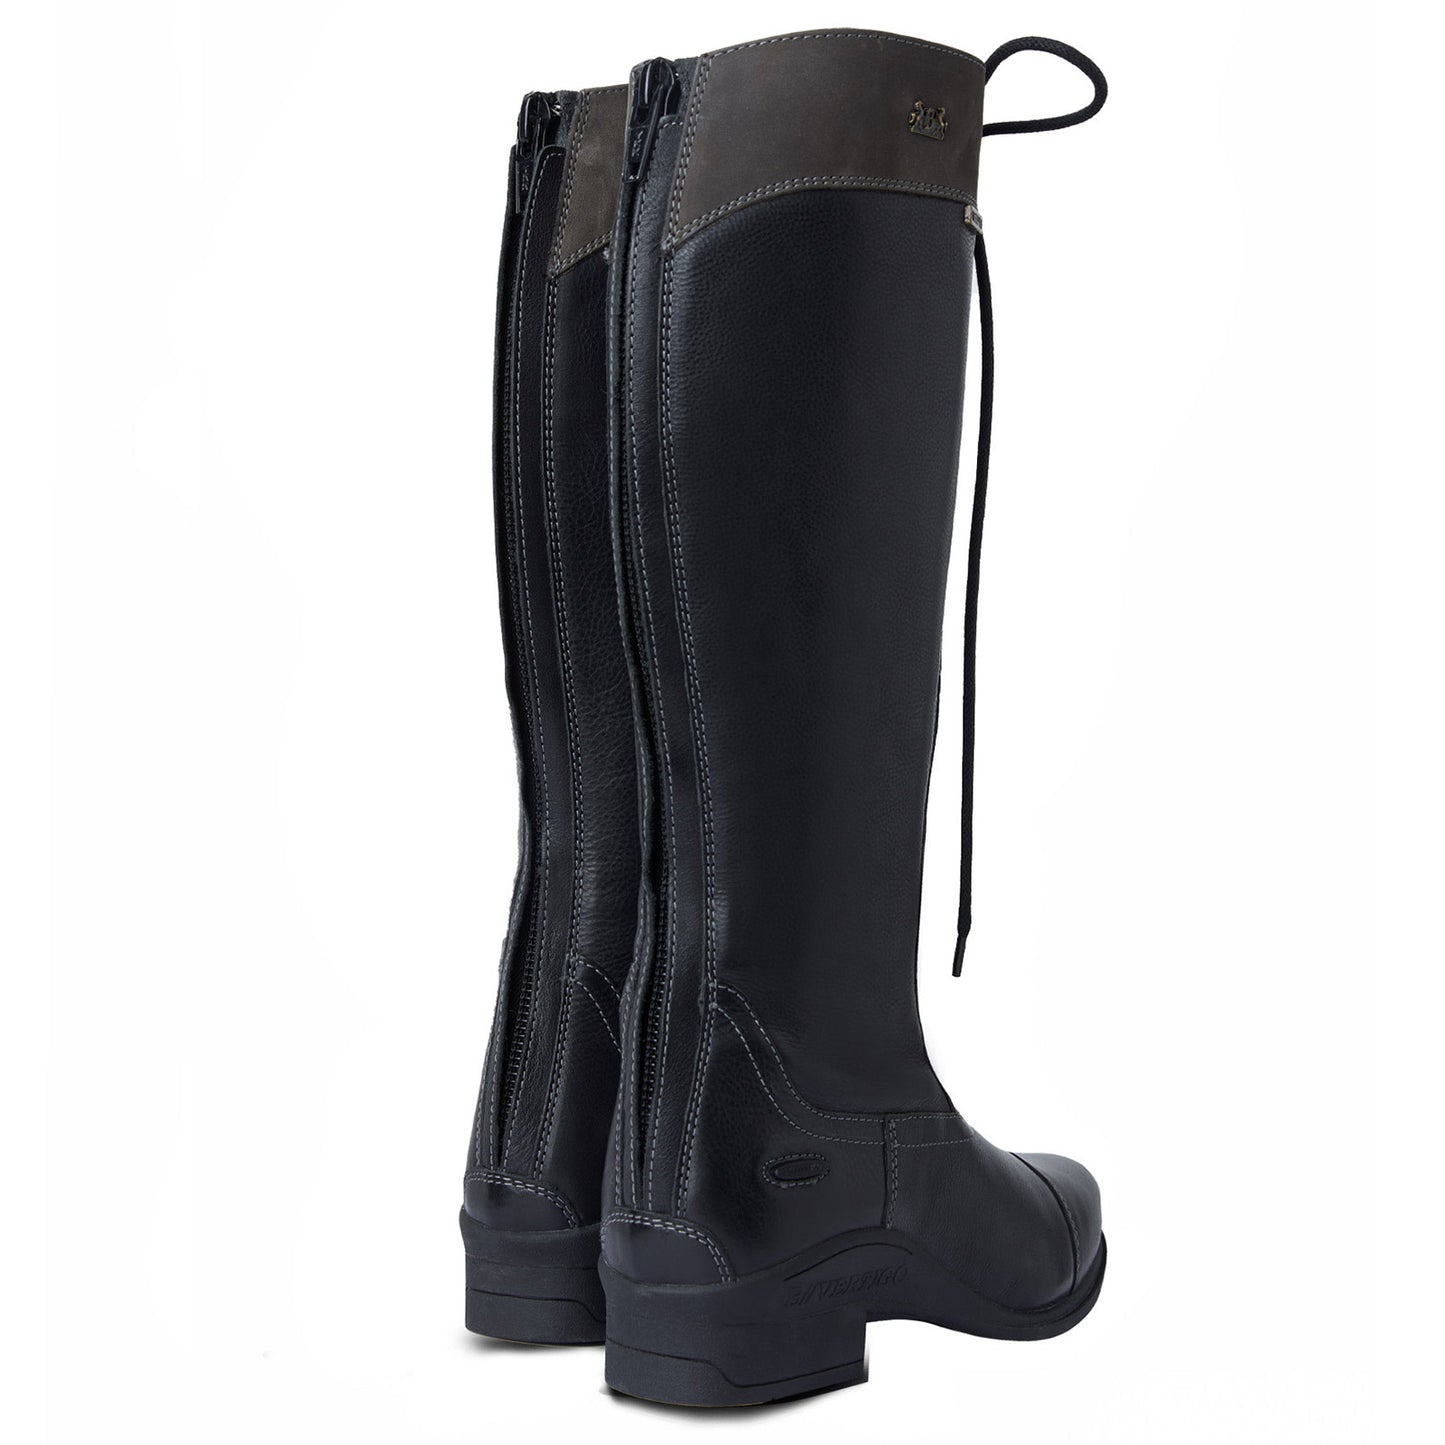 Laura's Loft || Cetus Waterproof Tall Boots || Size 36/US5.5 ONLY